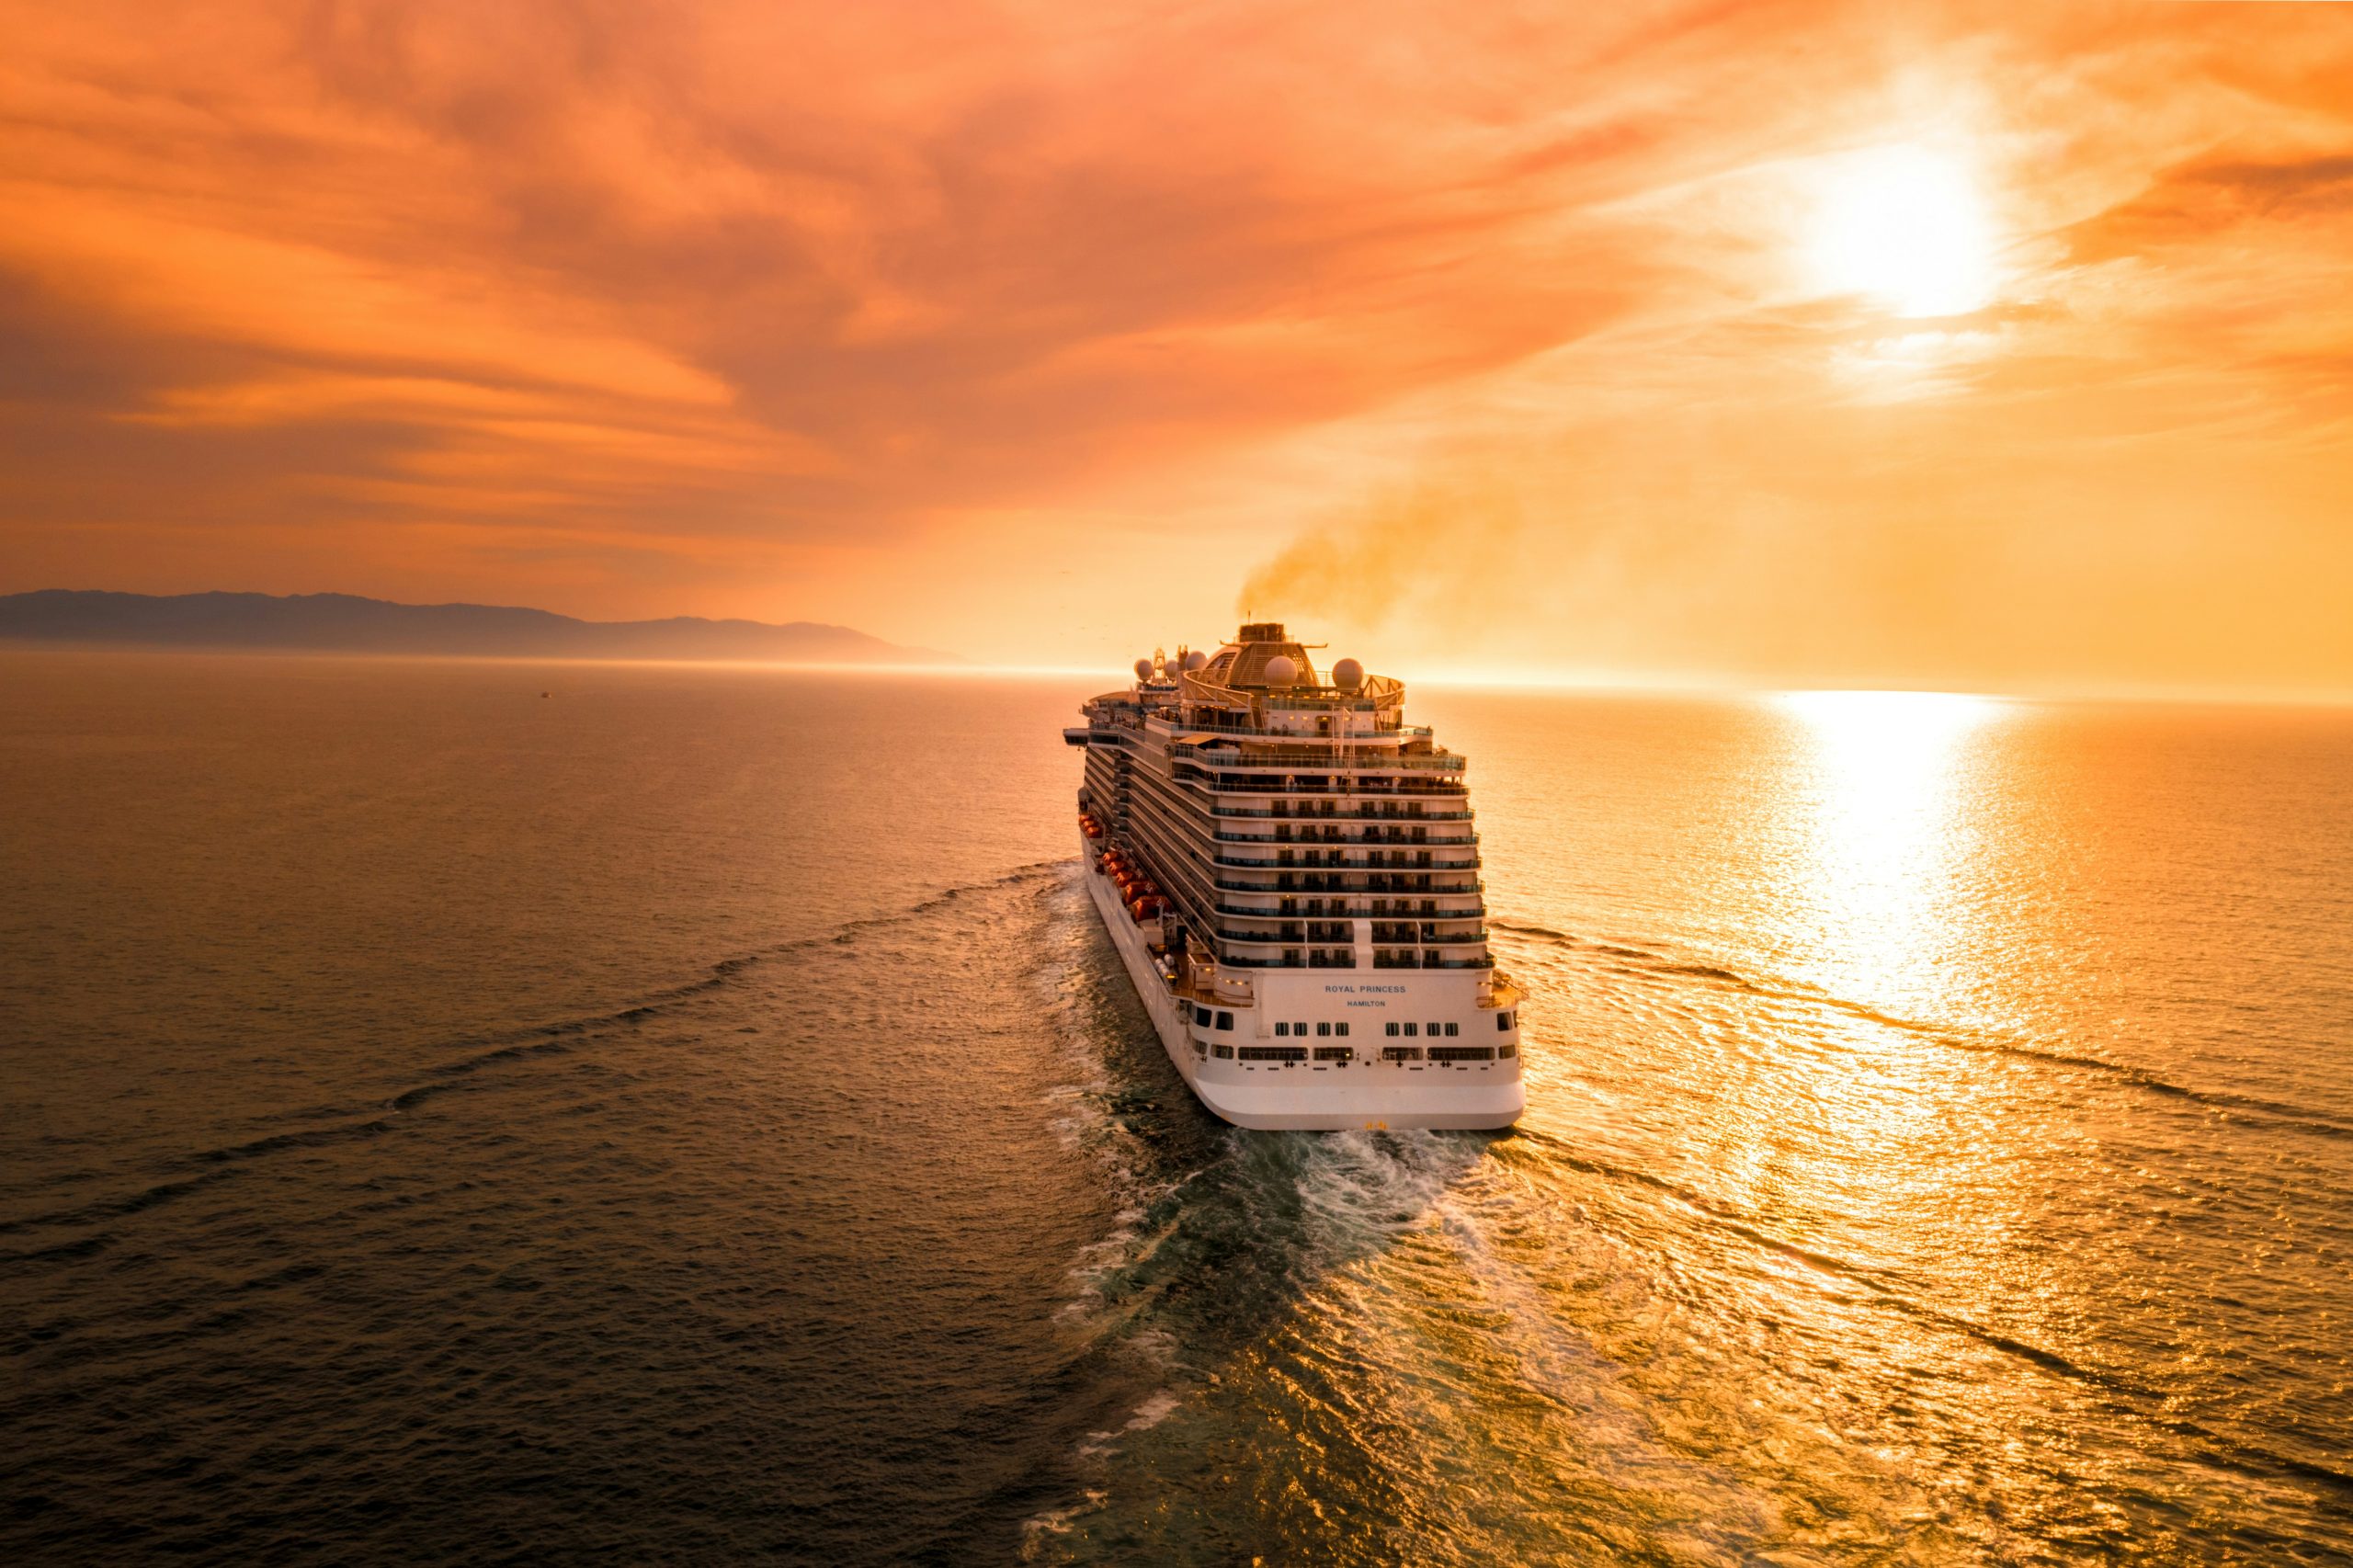 explore the world's best cruise destinations with our unforgettable cruise experiences. find your dream vacation today.